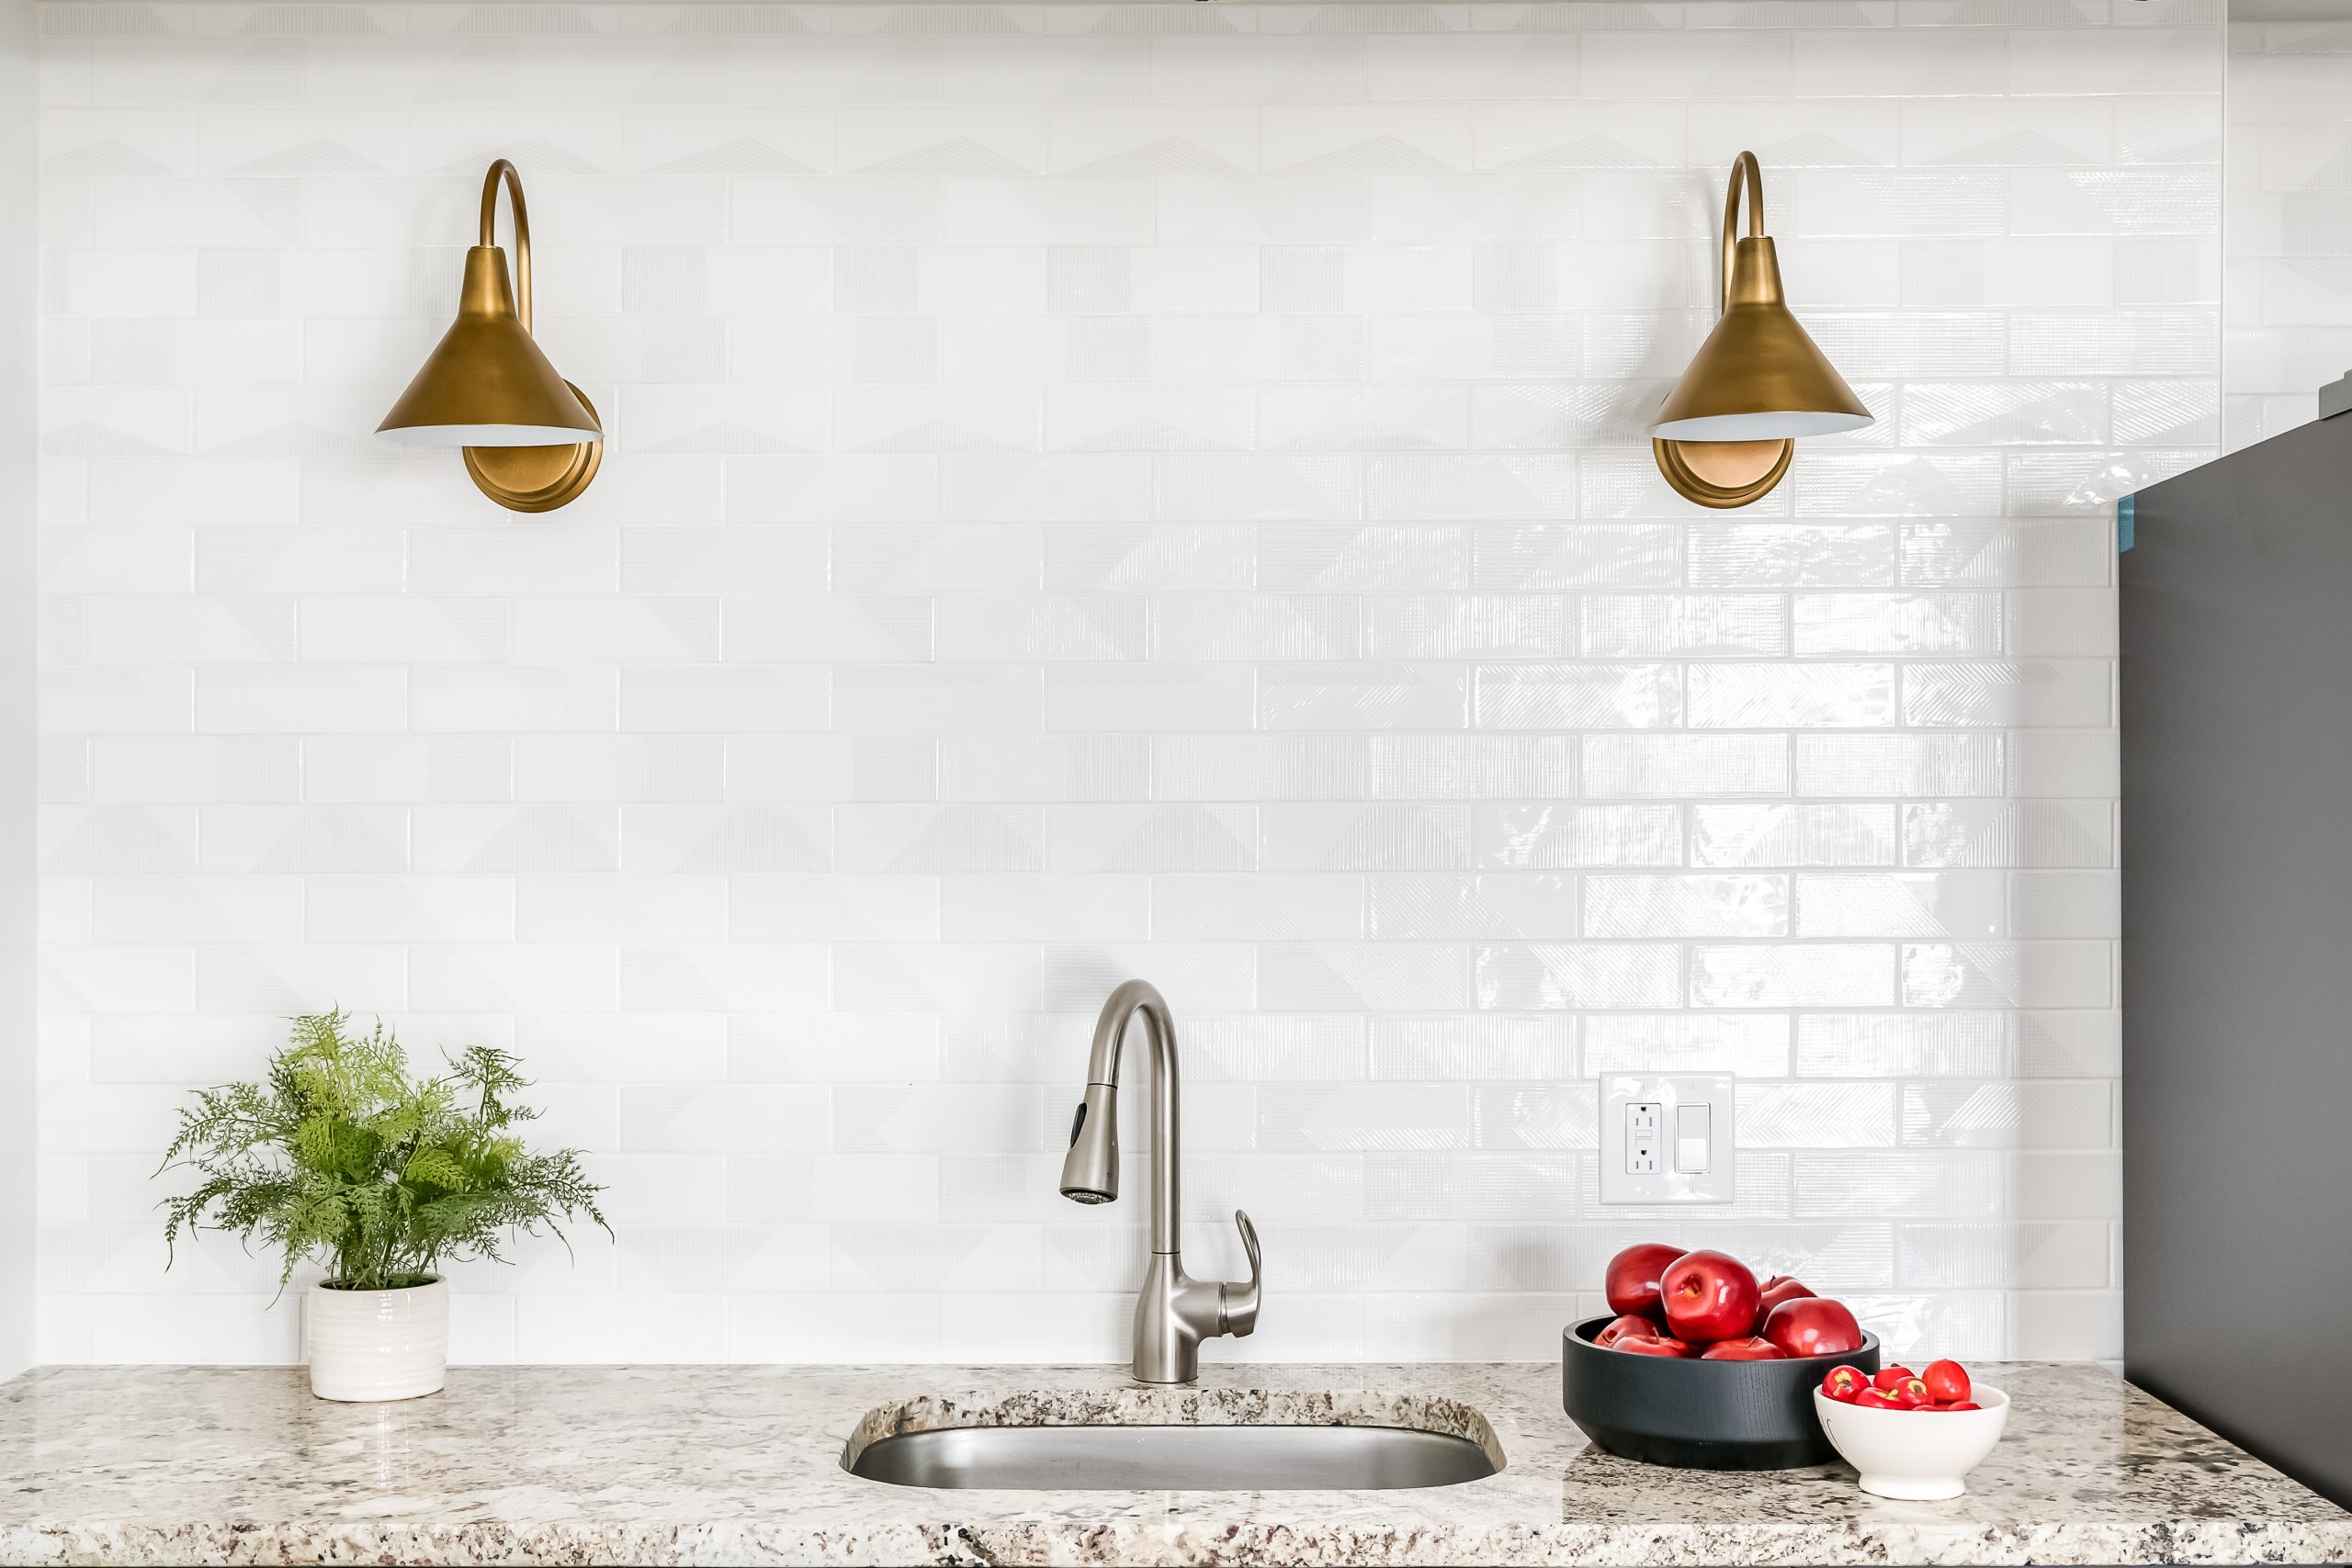 Copper kitchen wall lighting